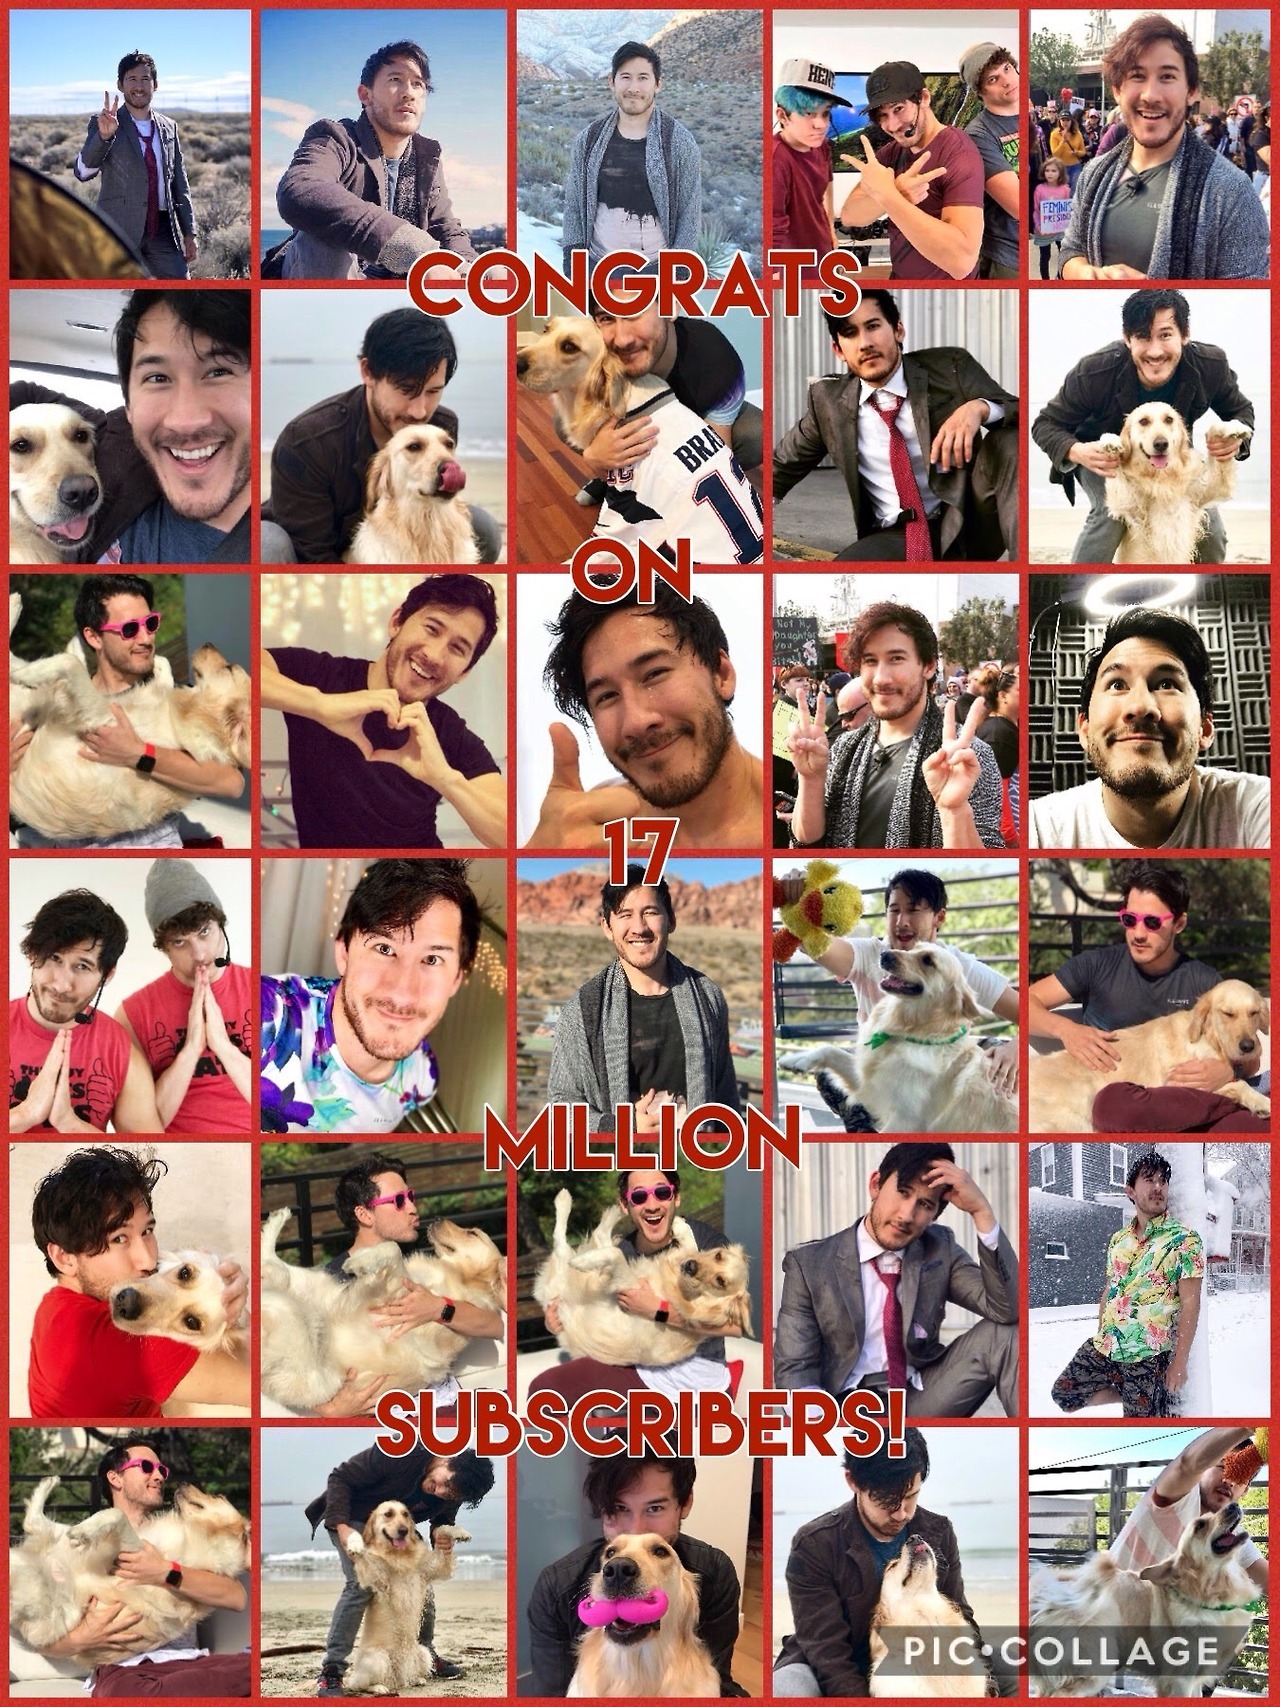 briseptiplier:  Congrats to @markiplier and the community for getting the channel